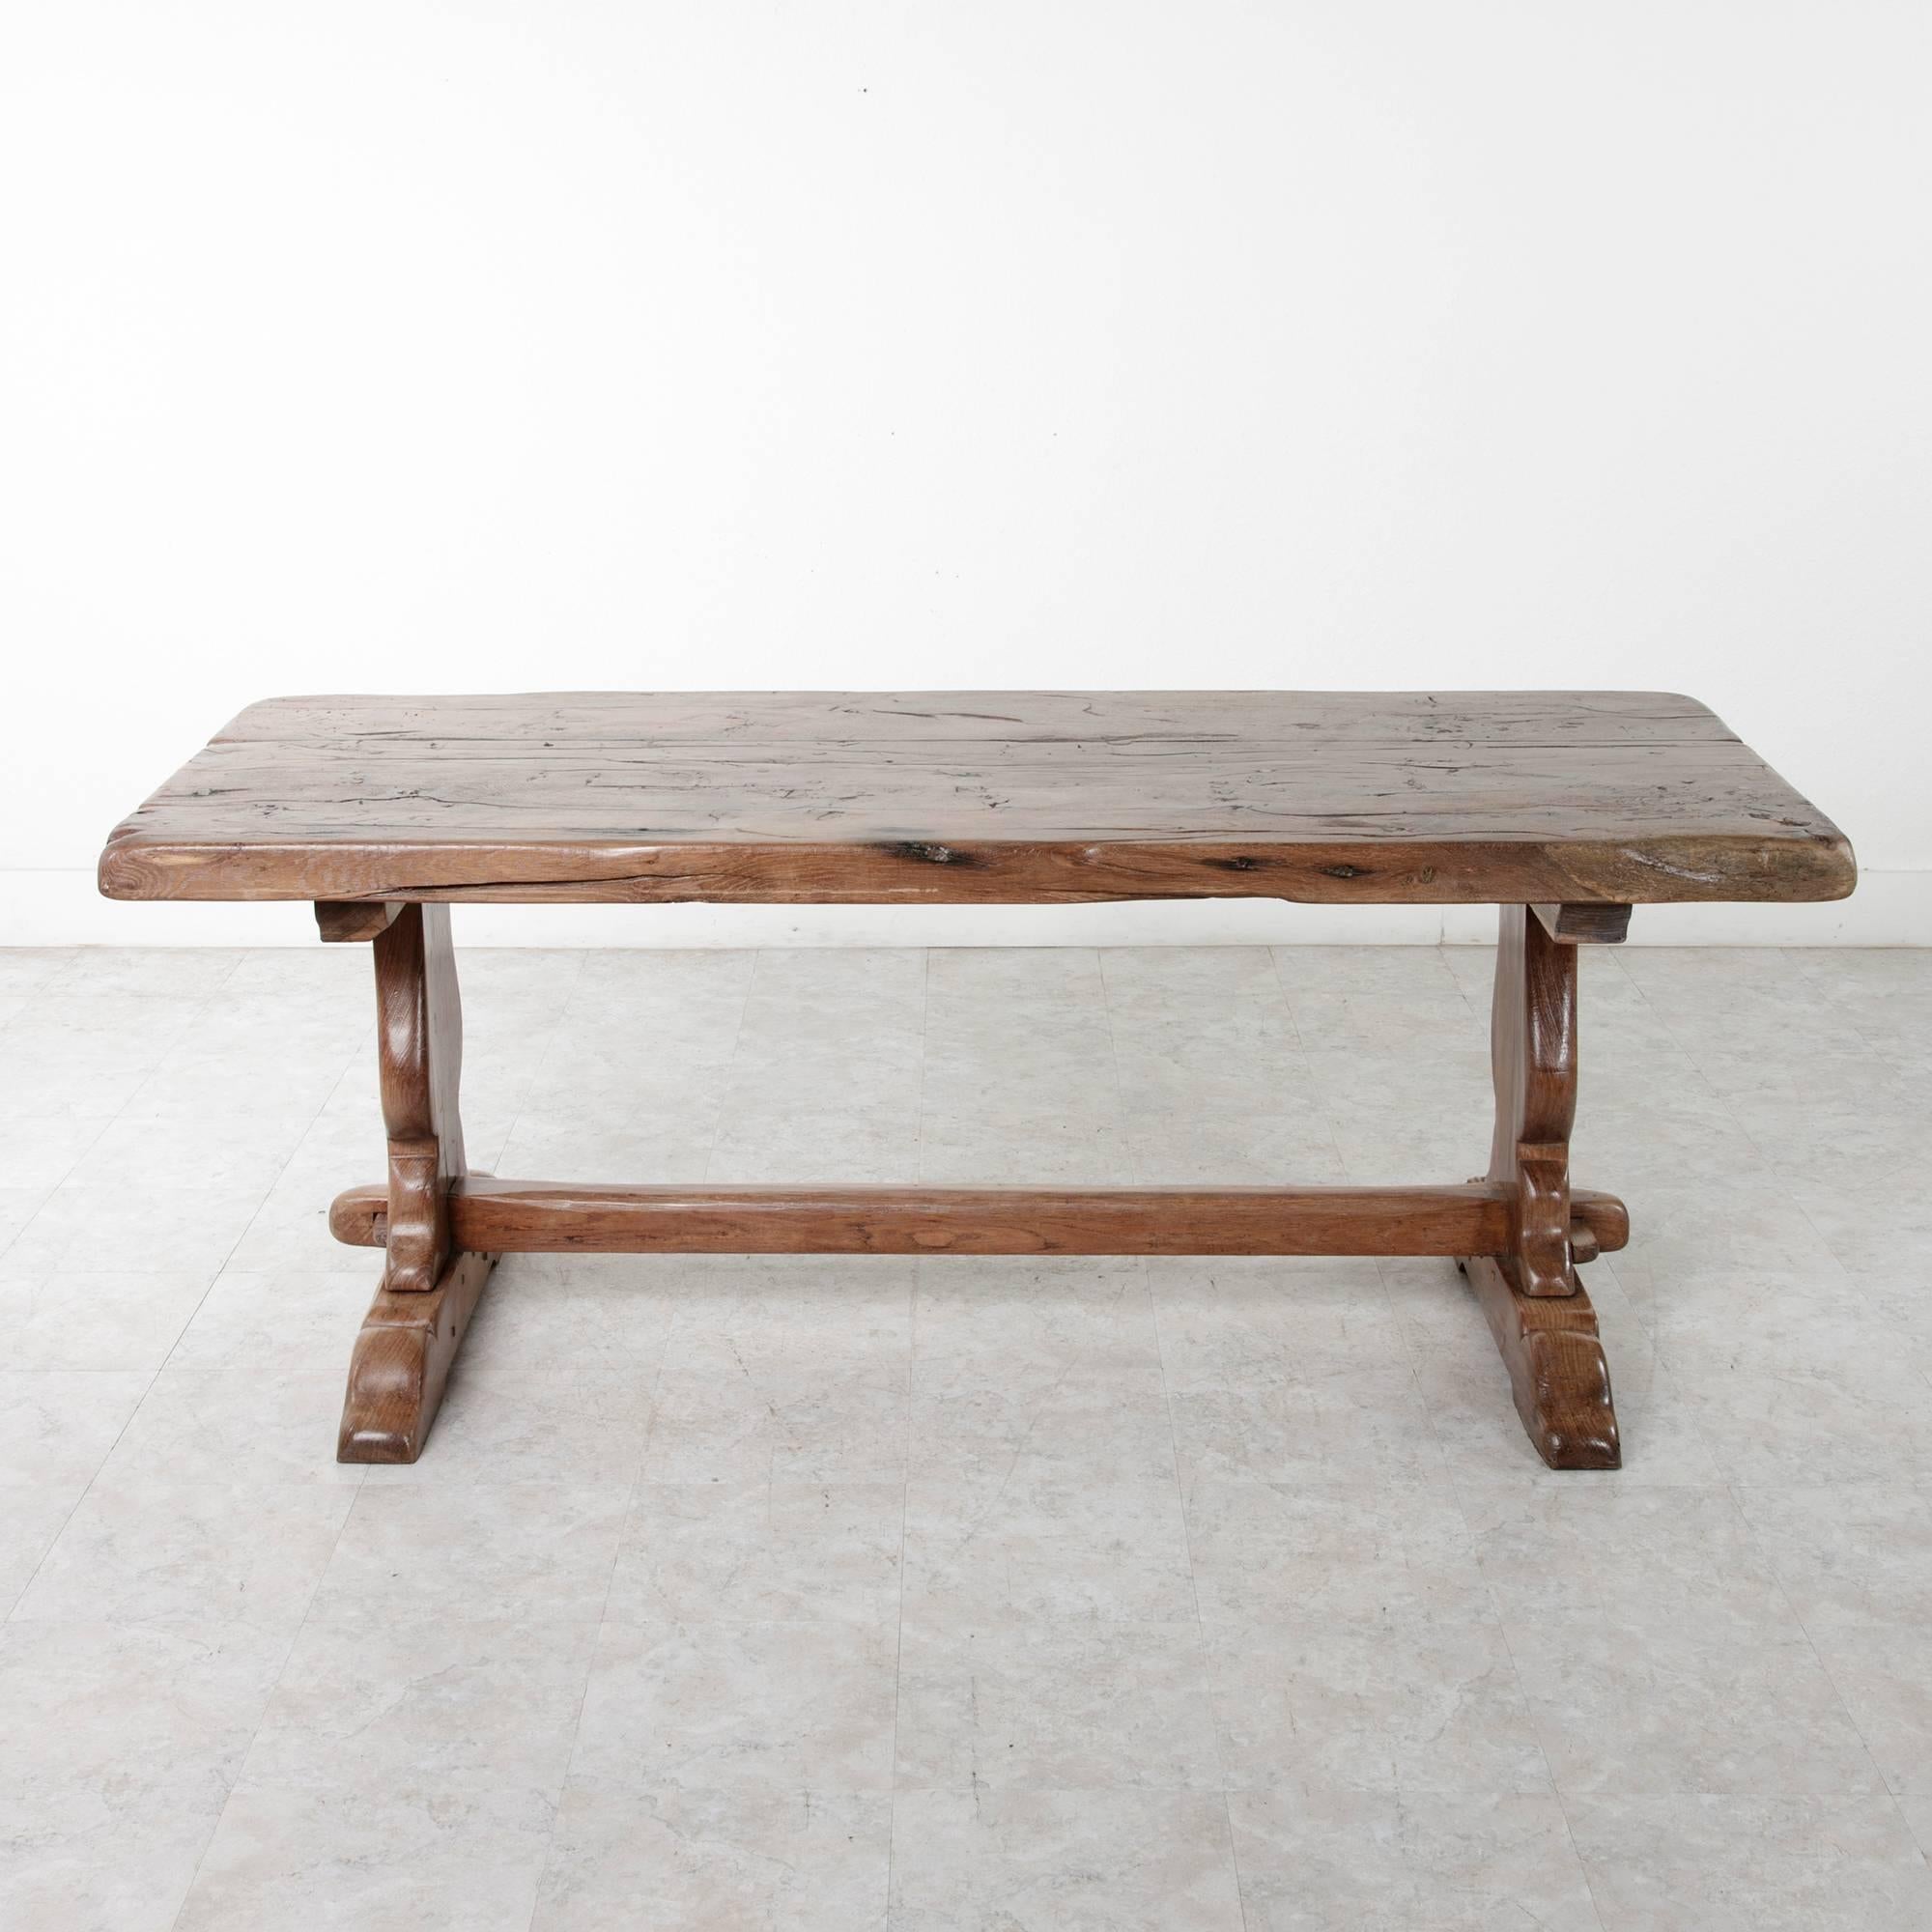 Antique French Farm Table in the Monastery Style of Solid Oak from 18th Century 2